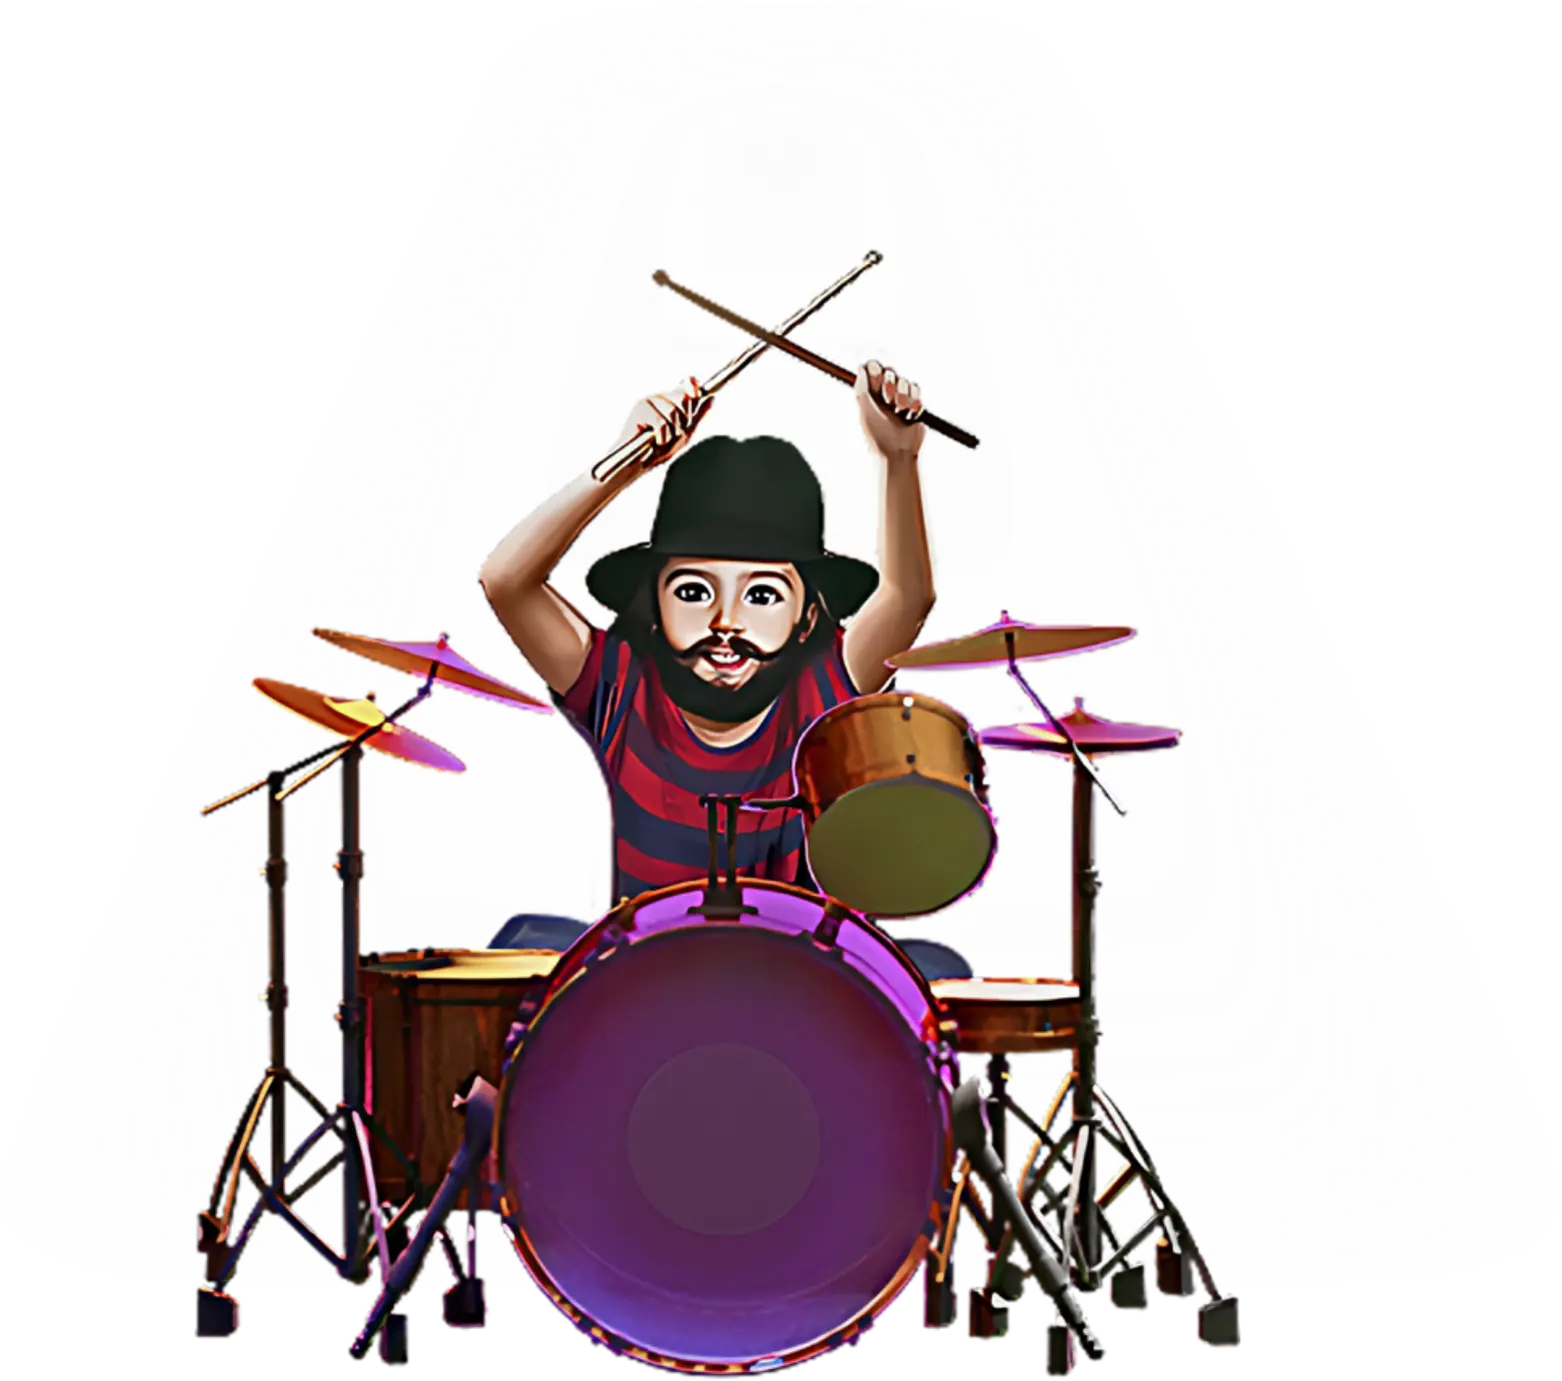 Drums character